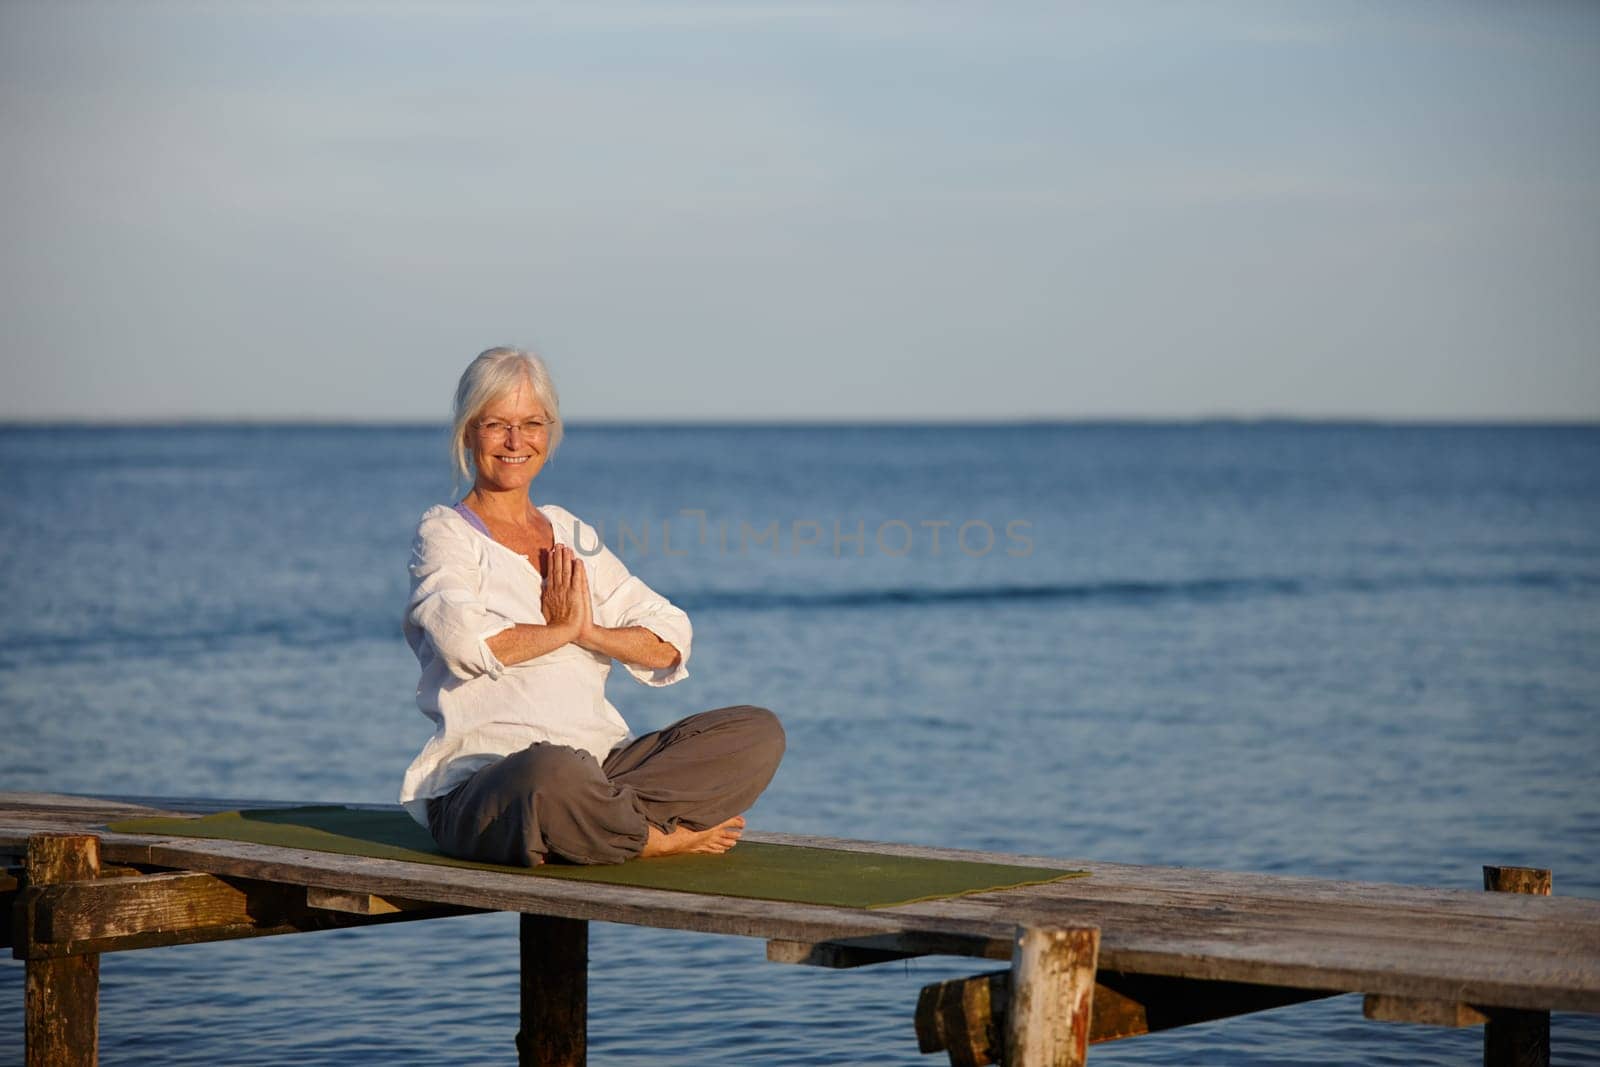 Yoga keeps me young at heart. Portrait of an attractive mature woman doing yoga on a pier out on the ocean. by YuriArcurs